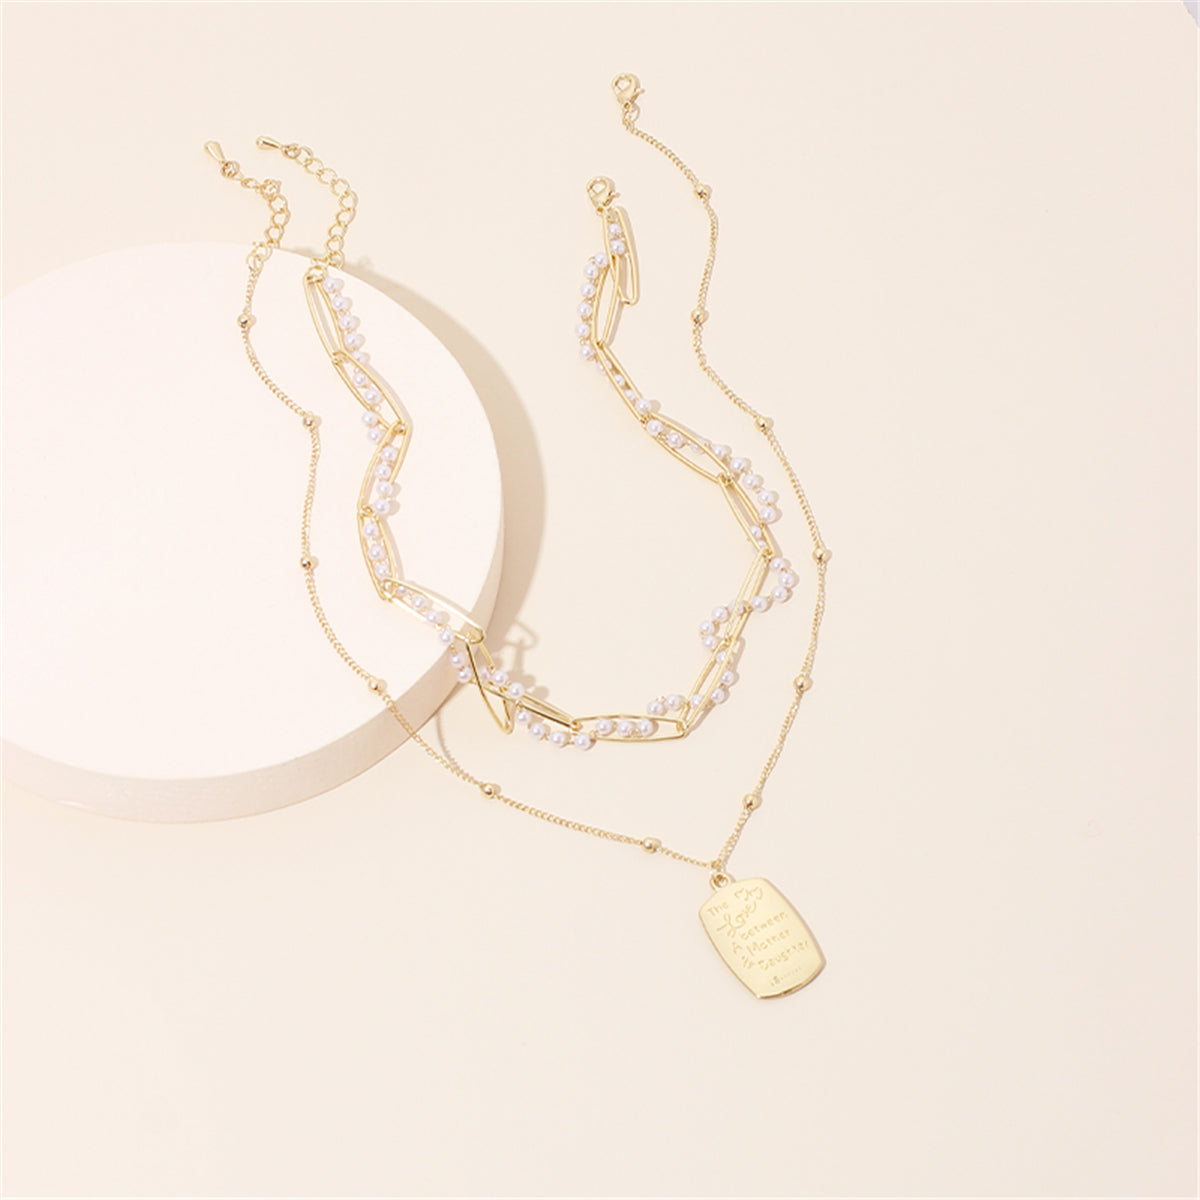 Pearl & 18K Gold-Plated 'Mother & Daughter' Pendant Necklace Set